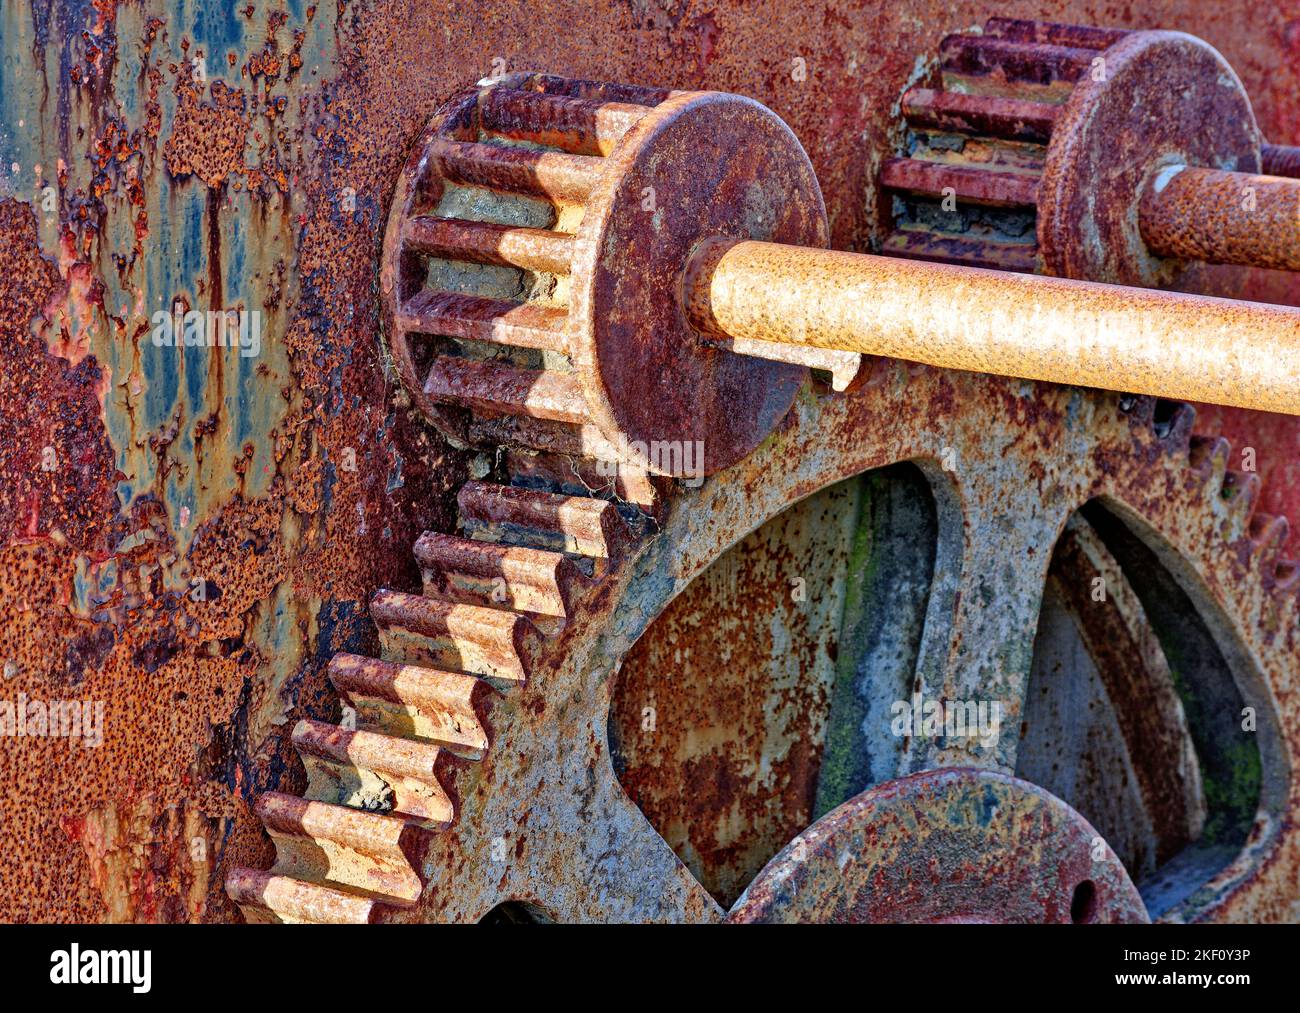 Old rusty or rusted toothed cog wheels Stock Photo